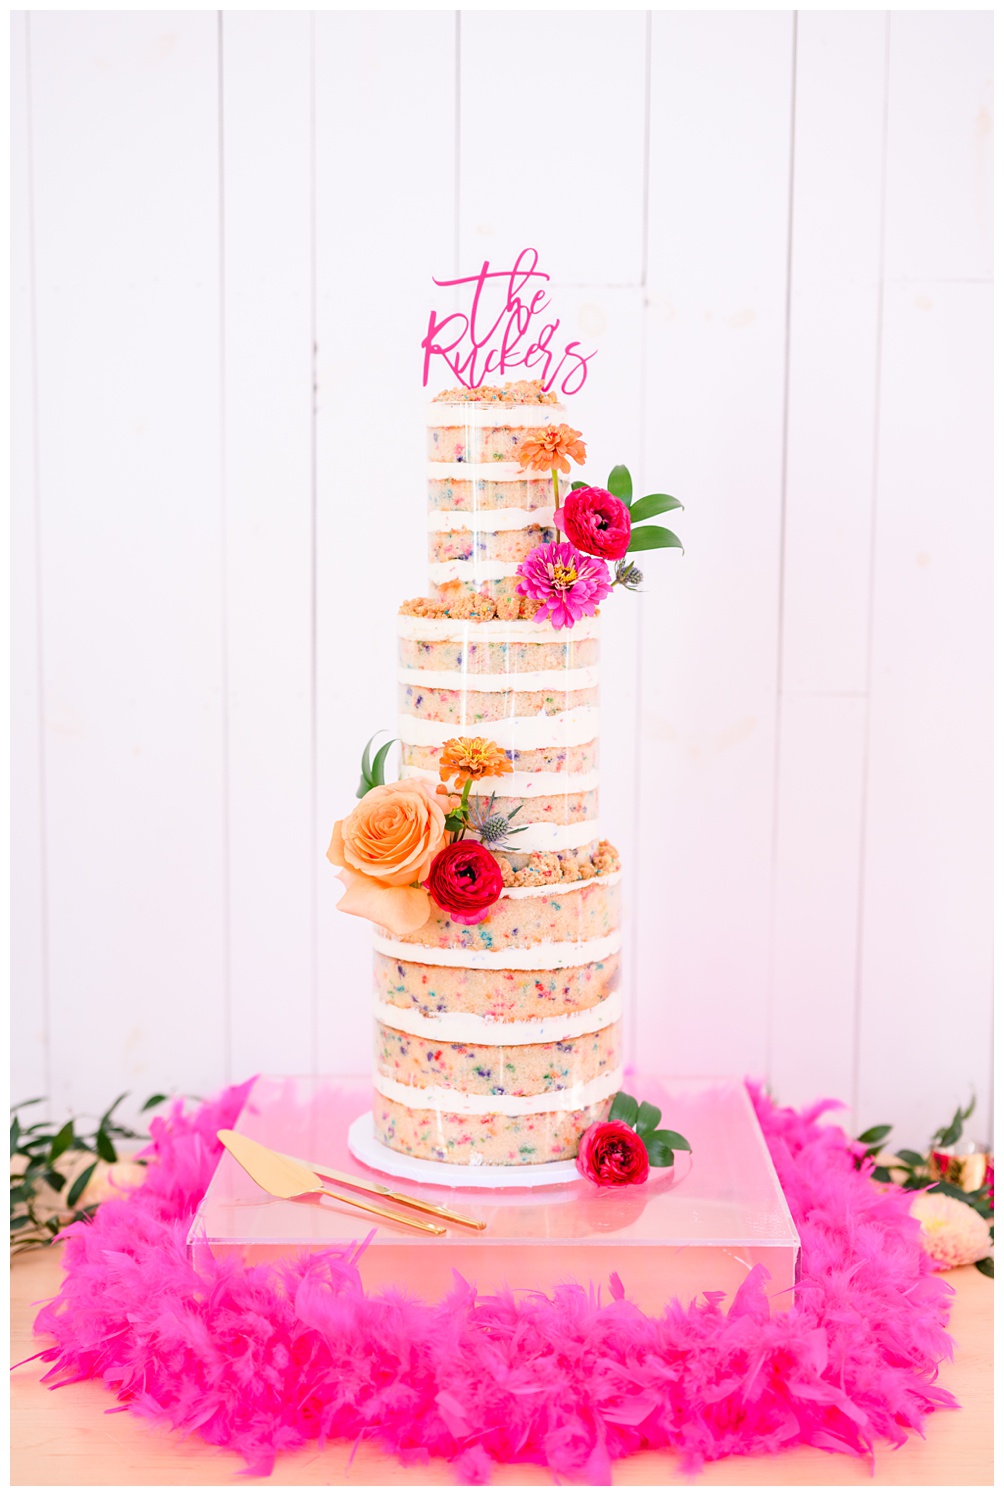 Feathers and Frosting Wedding Cake in Hot Pink